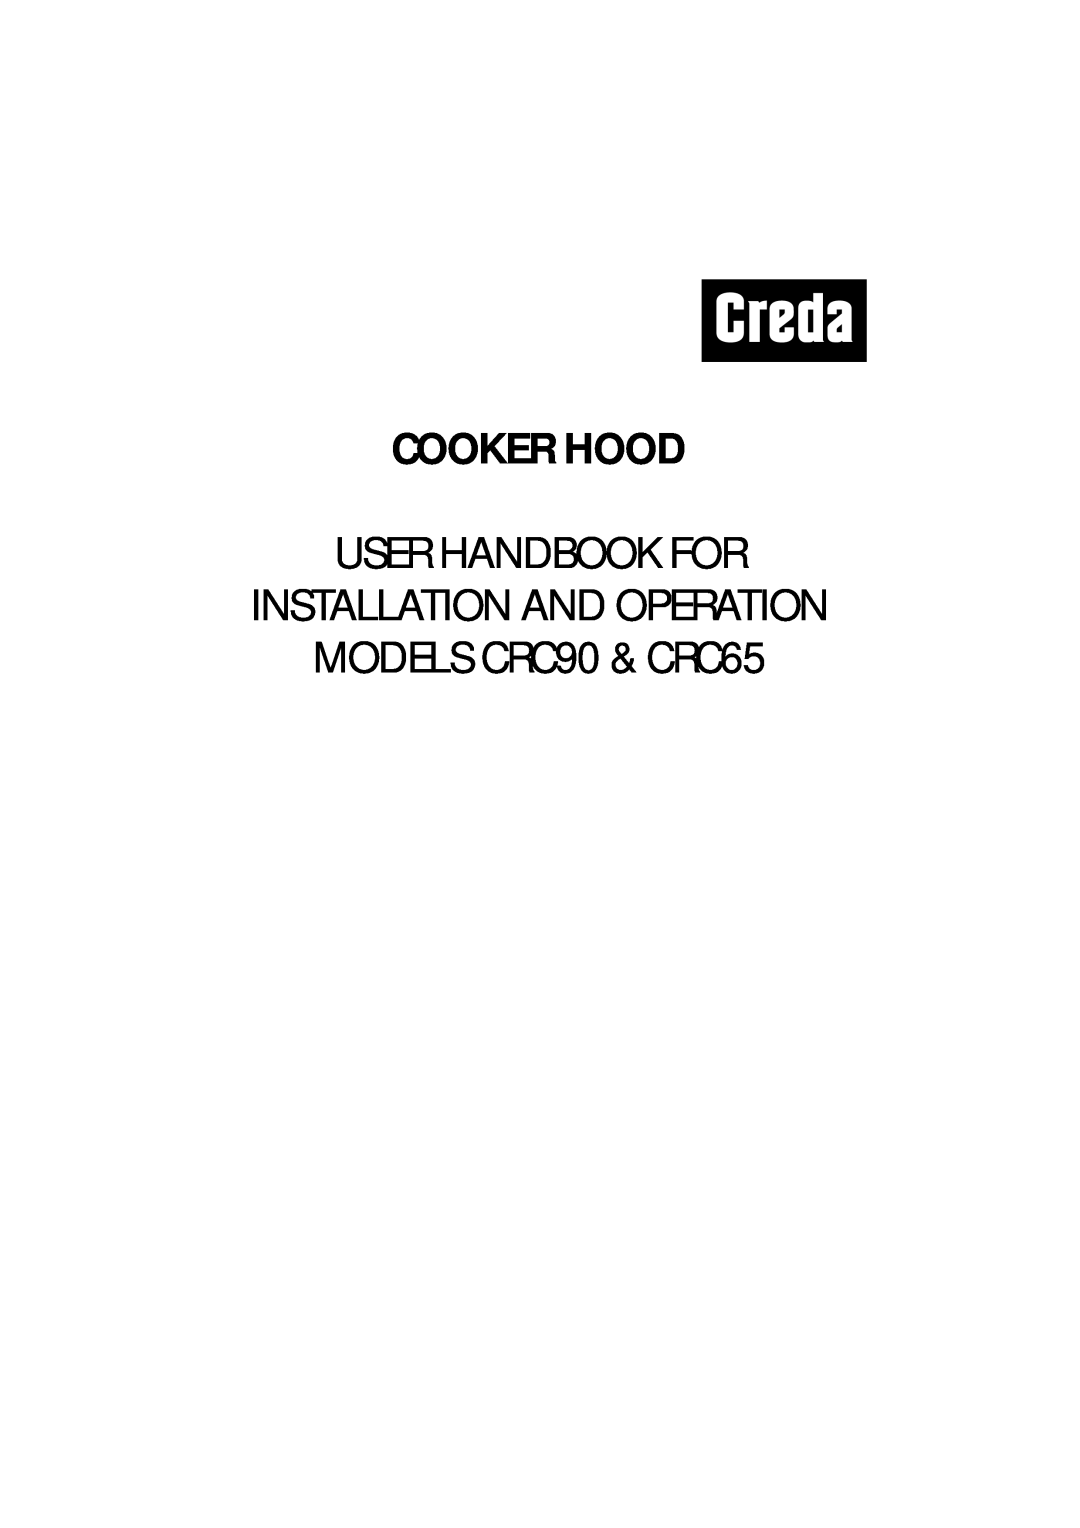 Creda manual Cooker Hood, User Handbook For Installation And Operation, MODELS CRC90 & CRC65 